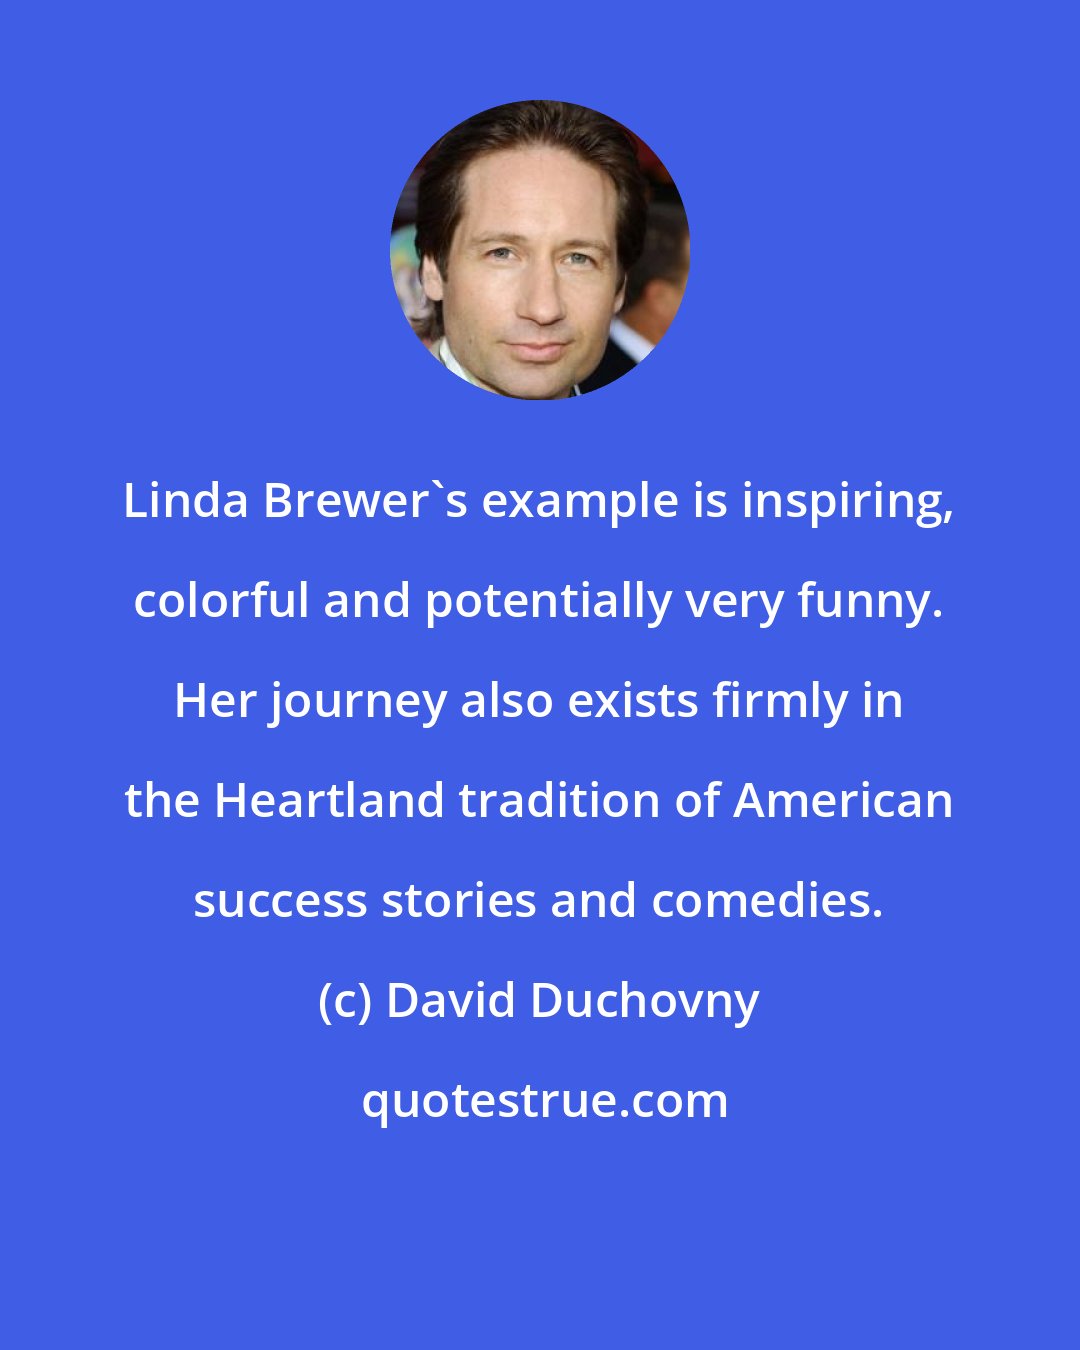 David Duchovny: Linda Brewer's example is inspiring, colorful and potentially very funny. Her journey also exists firmly in the Heartland tradition of American success stories and comedies.